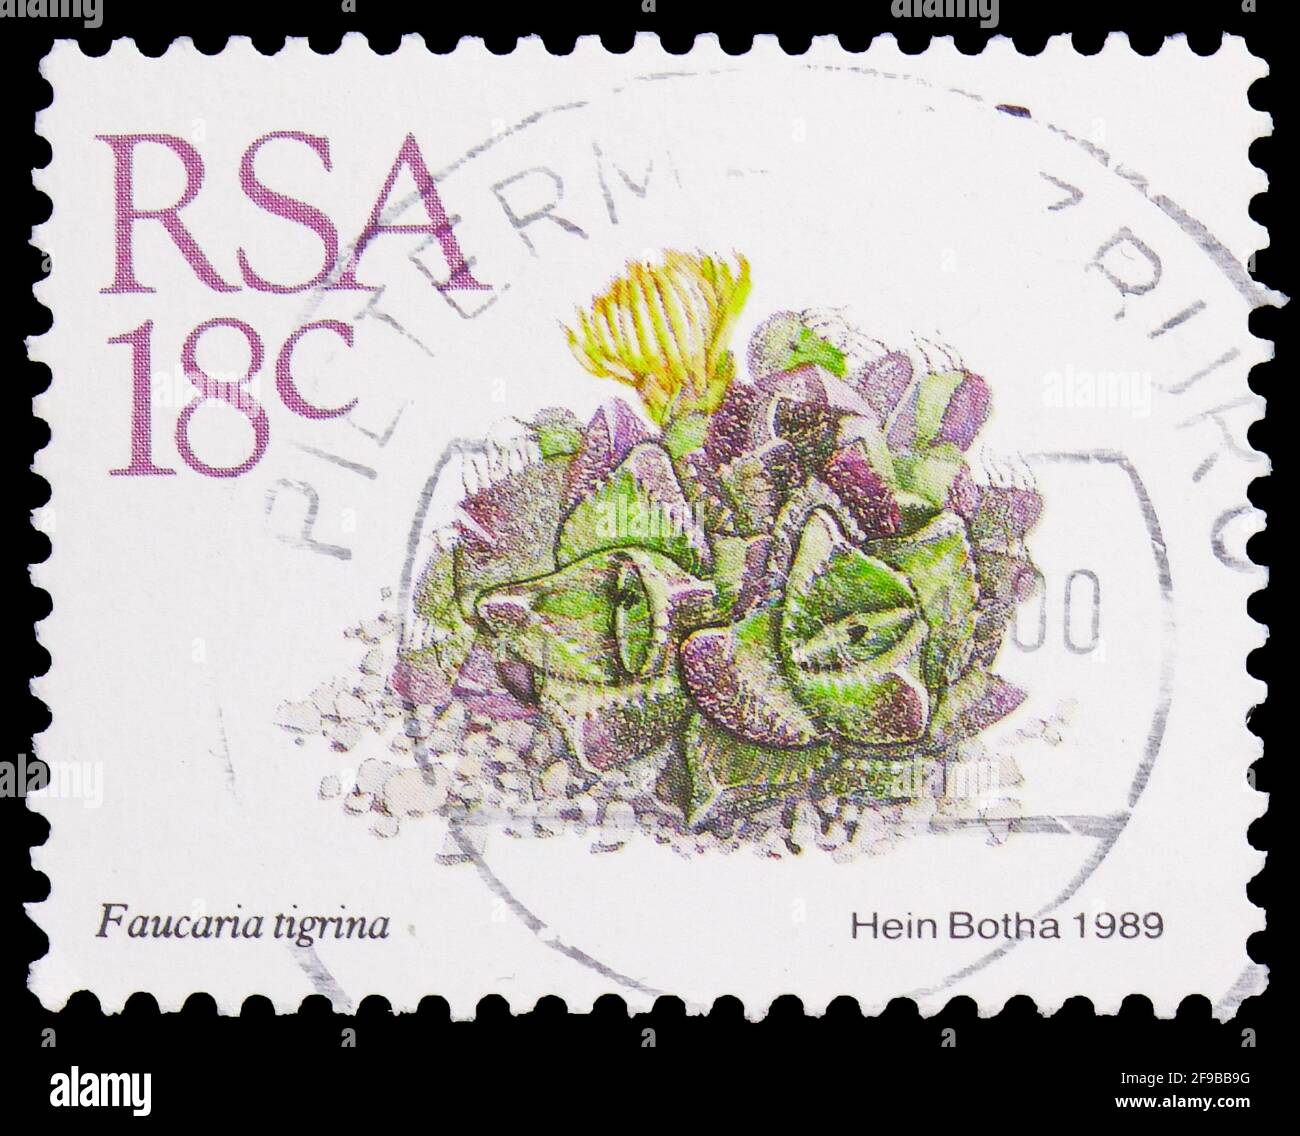 MOSCOW, RUSSIA - SEPTEMBER 24, 2019: Postage stamp printed in South Africa shows Faucaria tigrina, Definitive Issue - Succulents serie, circa 1989 Stock Photo